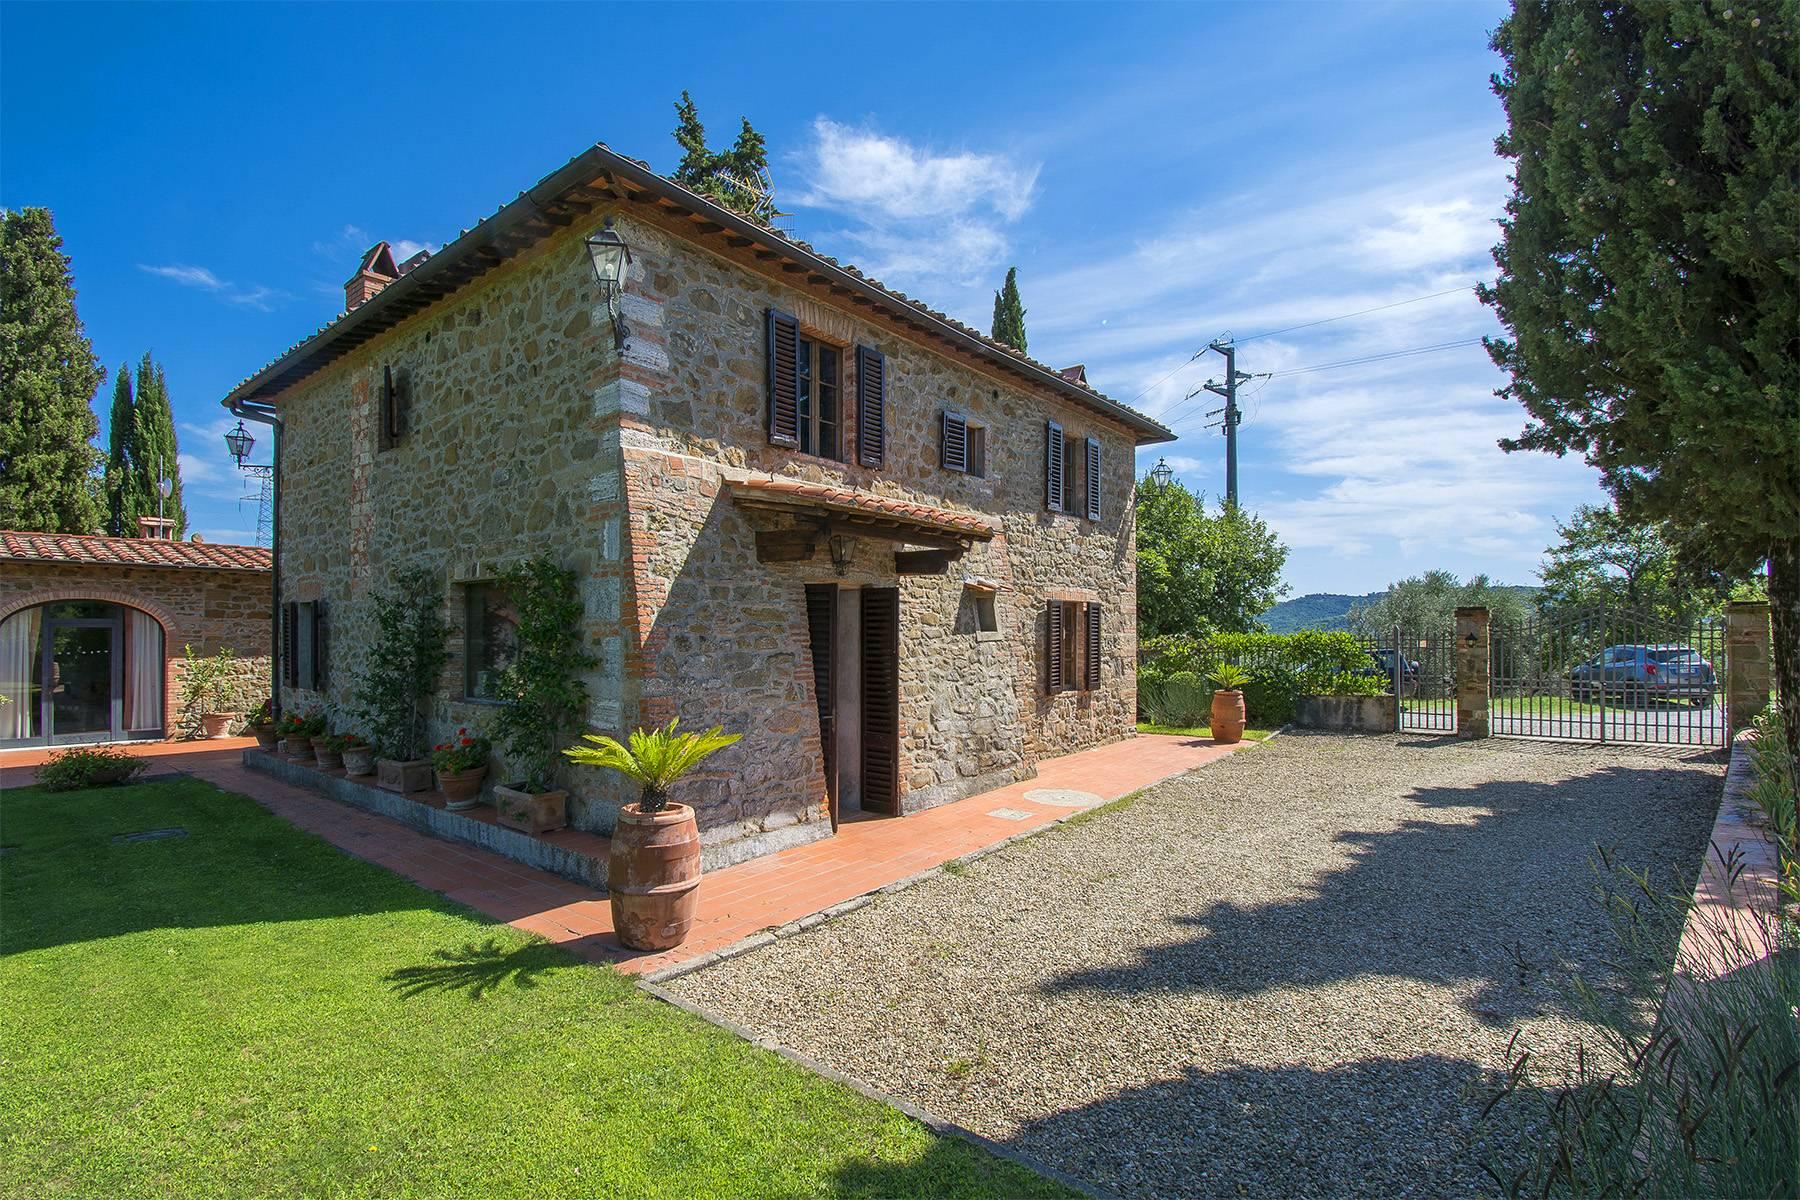 House in the Tuscan Hills for Sale - 1